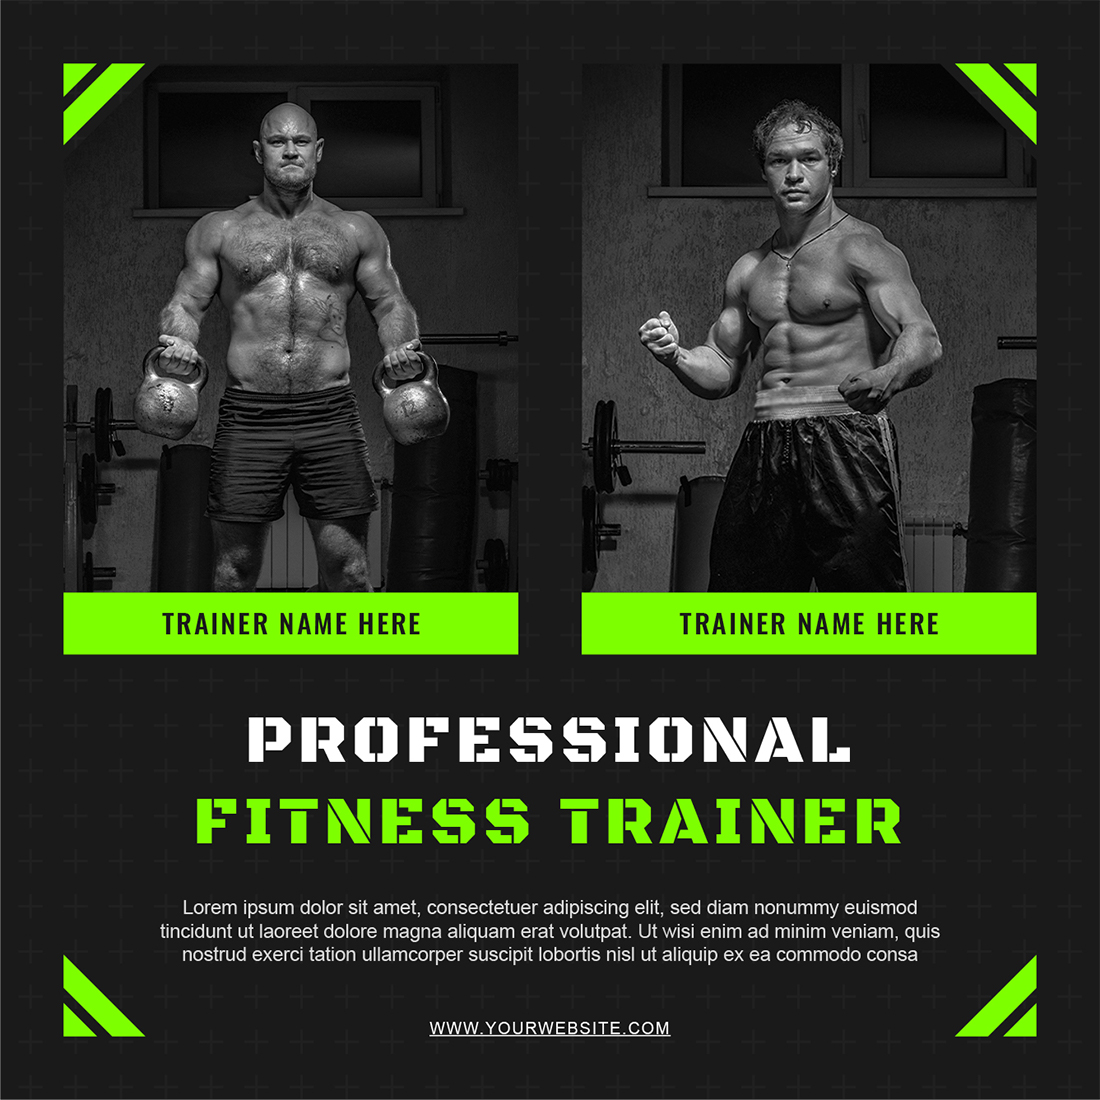 Tell more about professional fitness trainers.